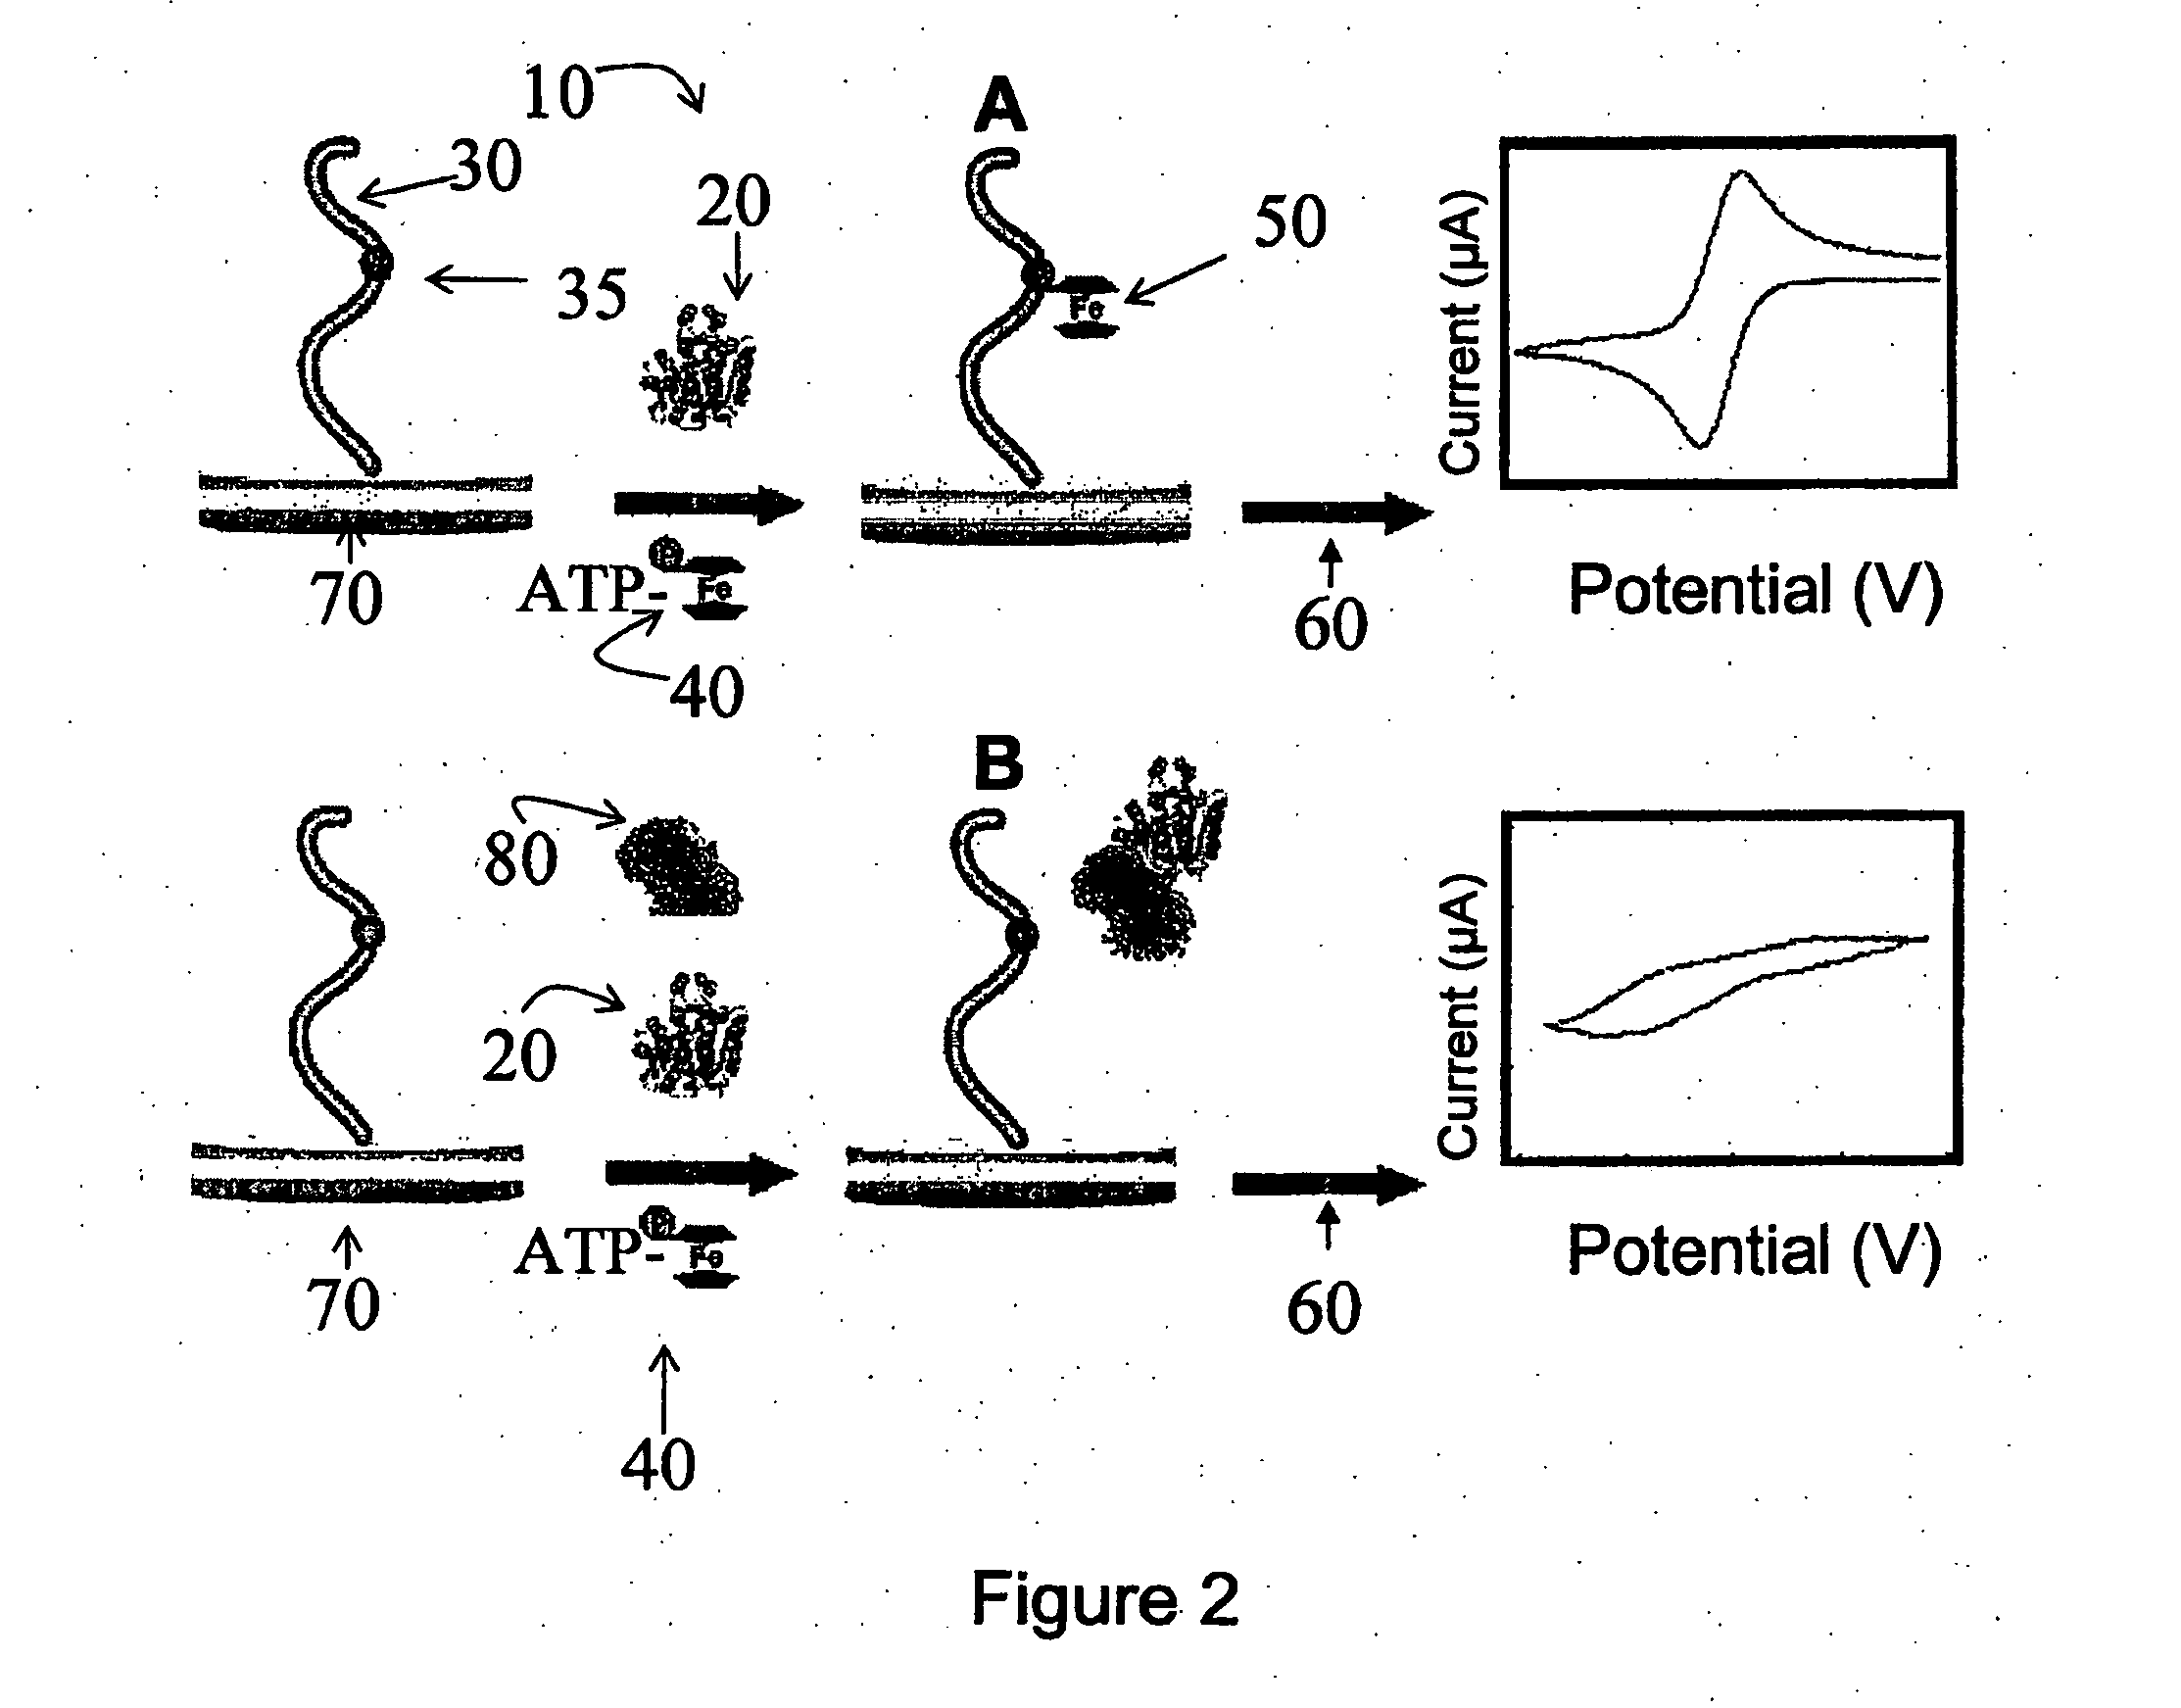 Nucleotide triphosphate with an electroactive label conjugated to the gamma phosphate